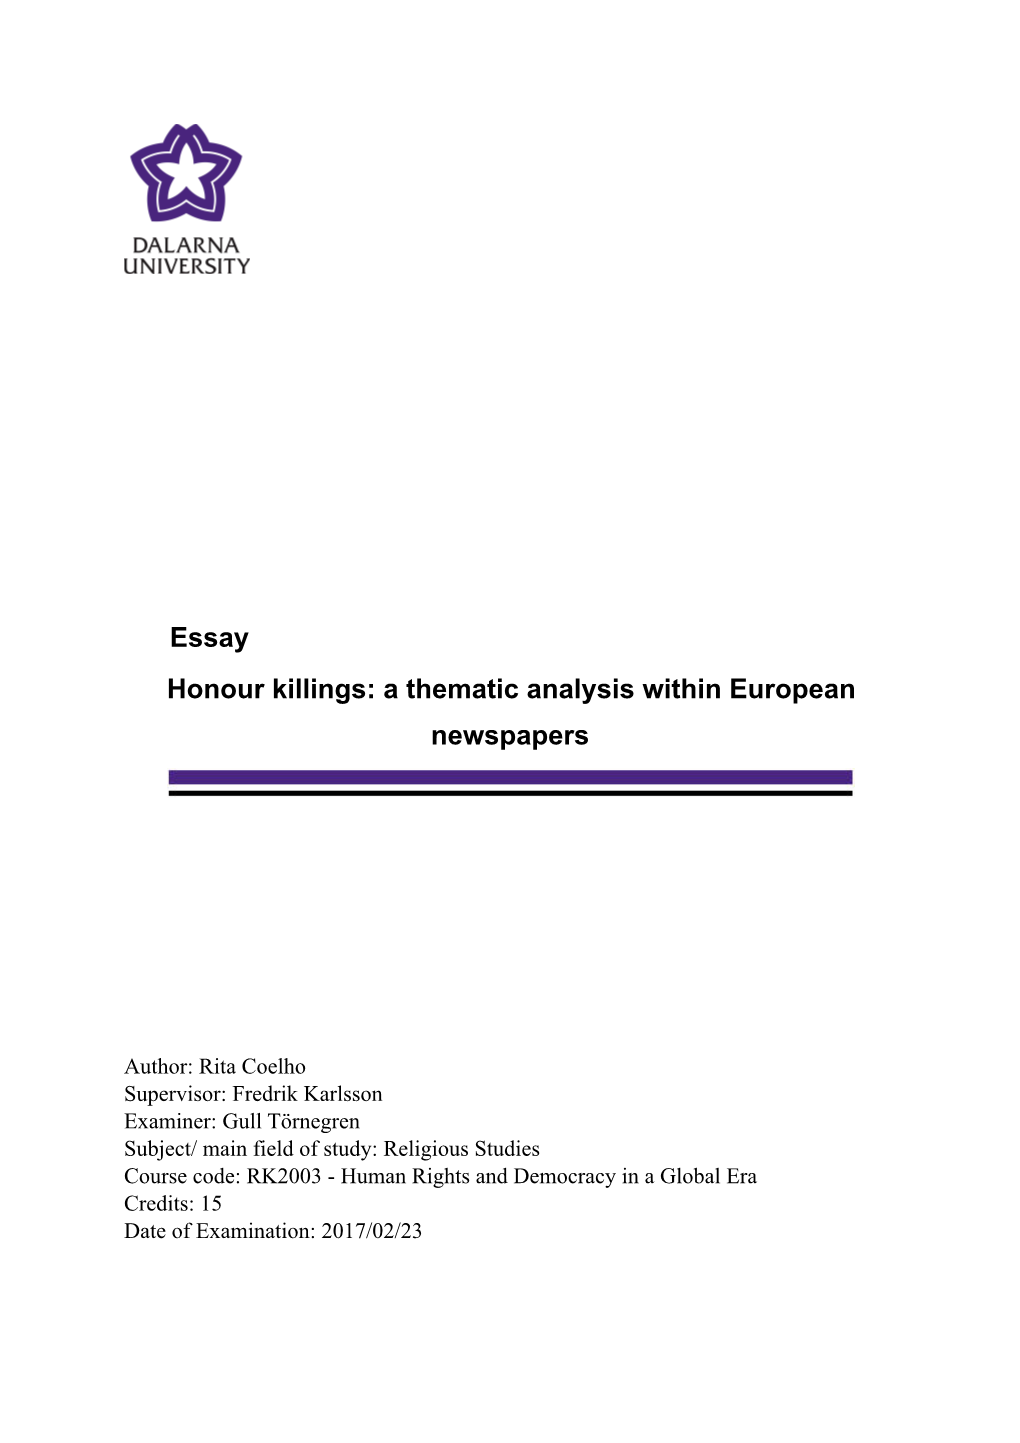 Essay Honour Killings: a Thematic Analysis Within European Newspapers